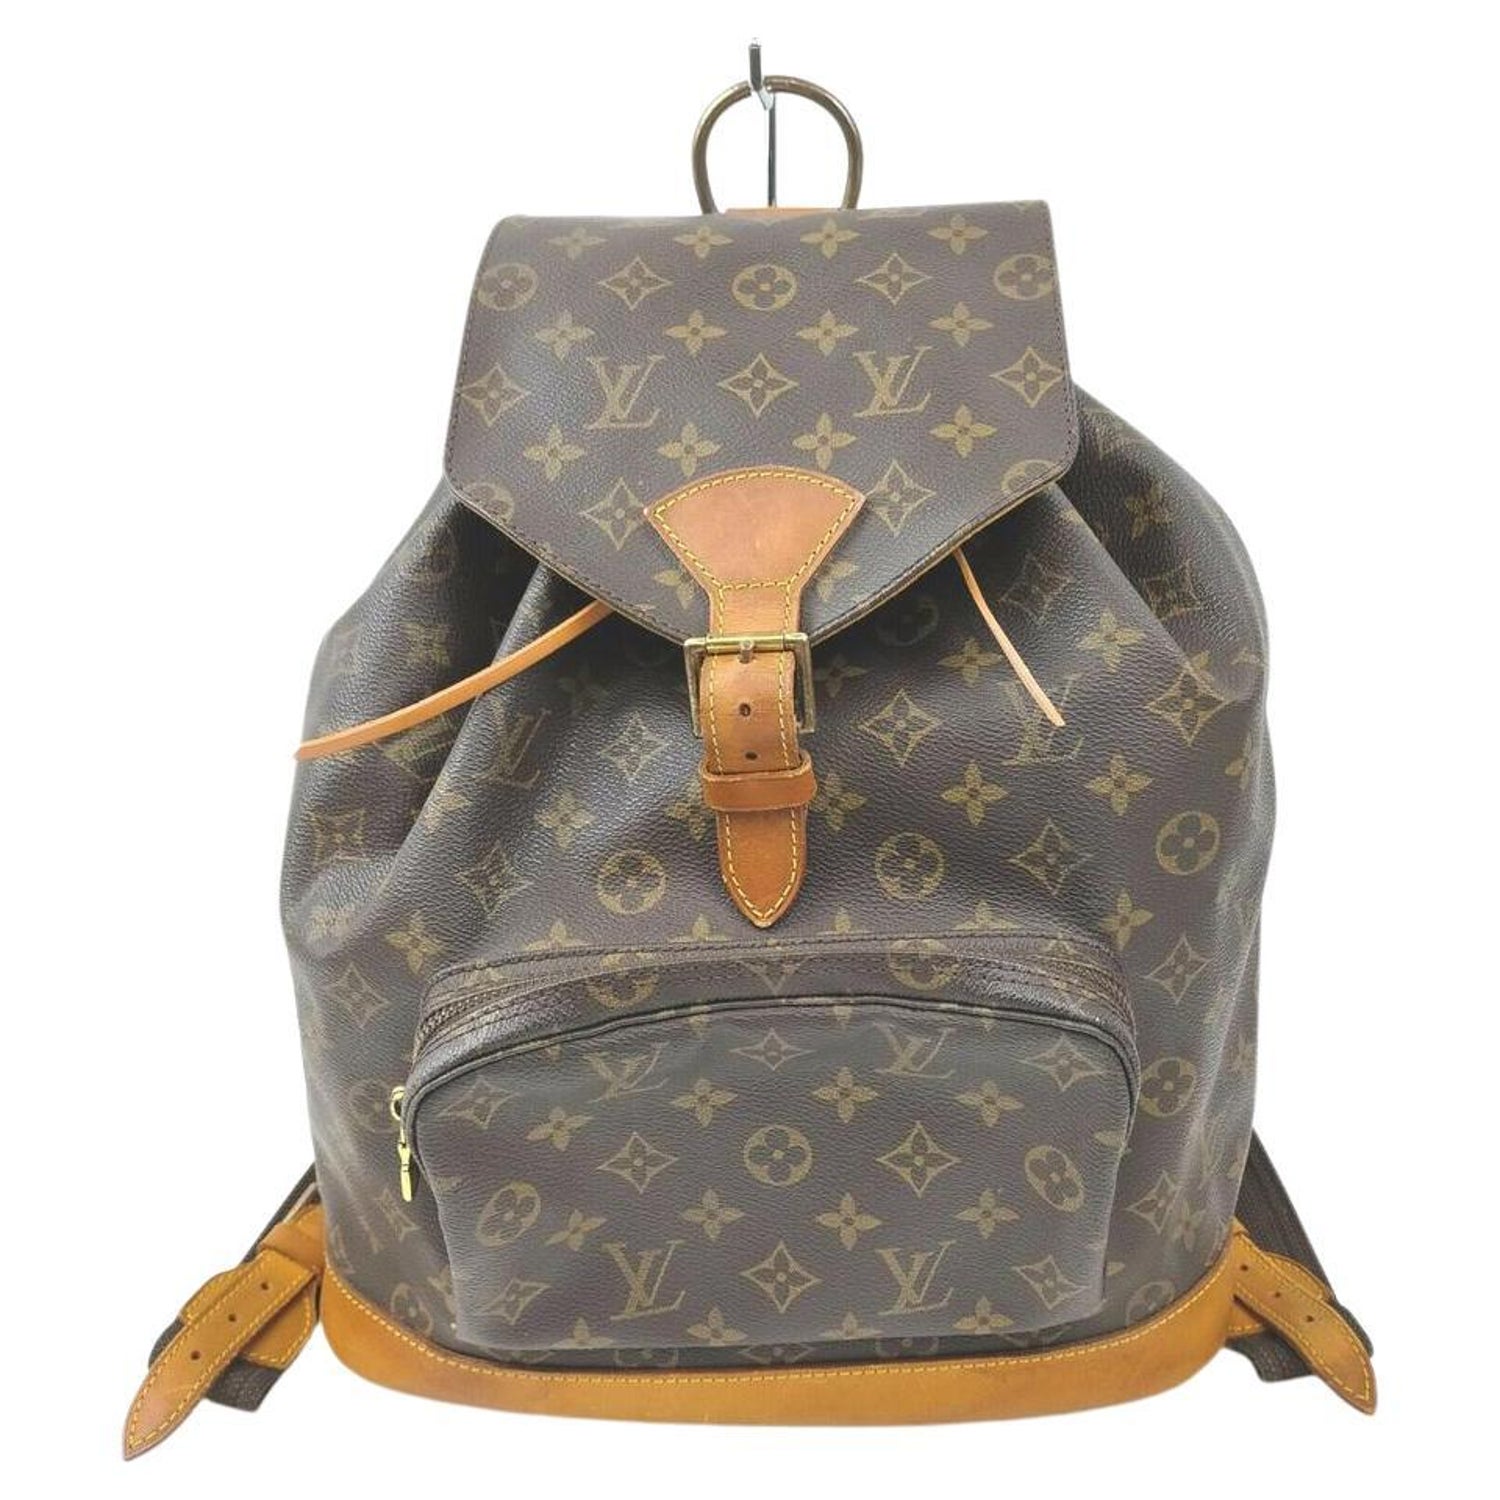 Lv Mini Backpack Best Price In Pakistan, Rs 5500